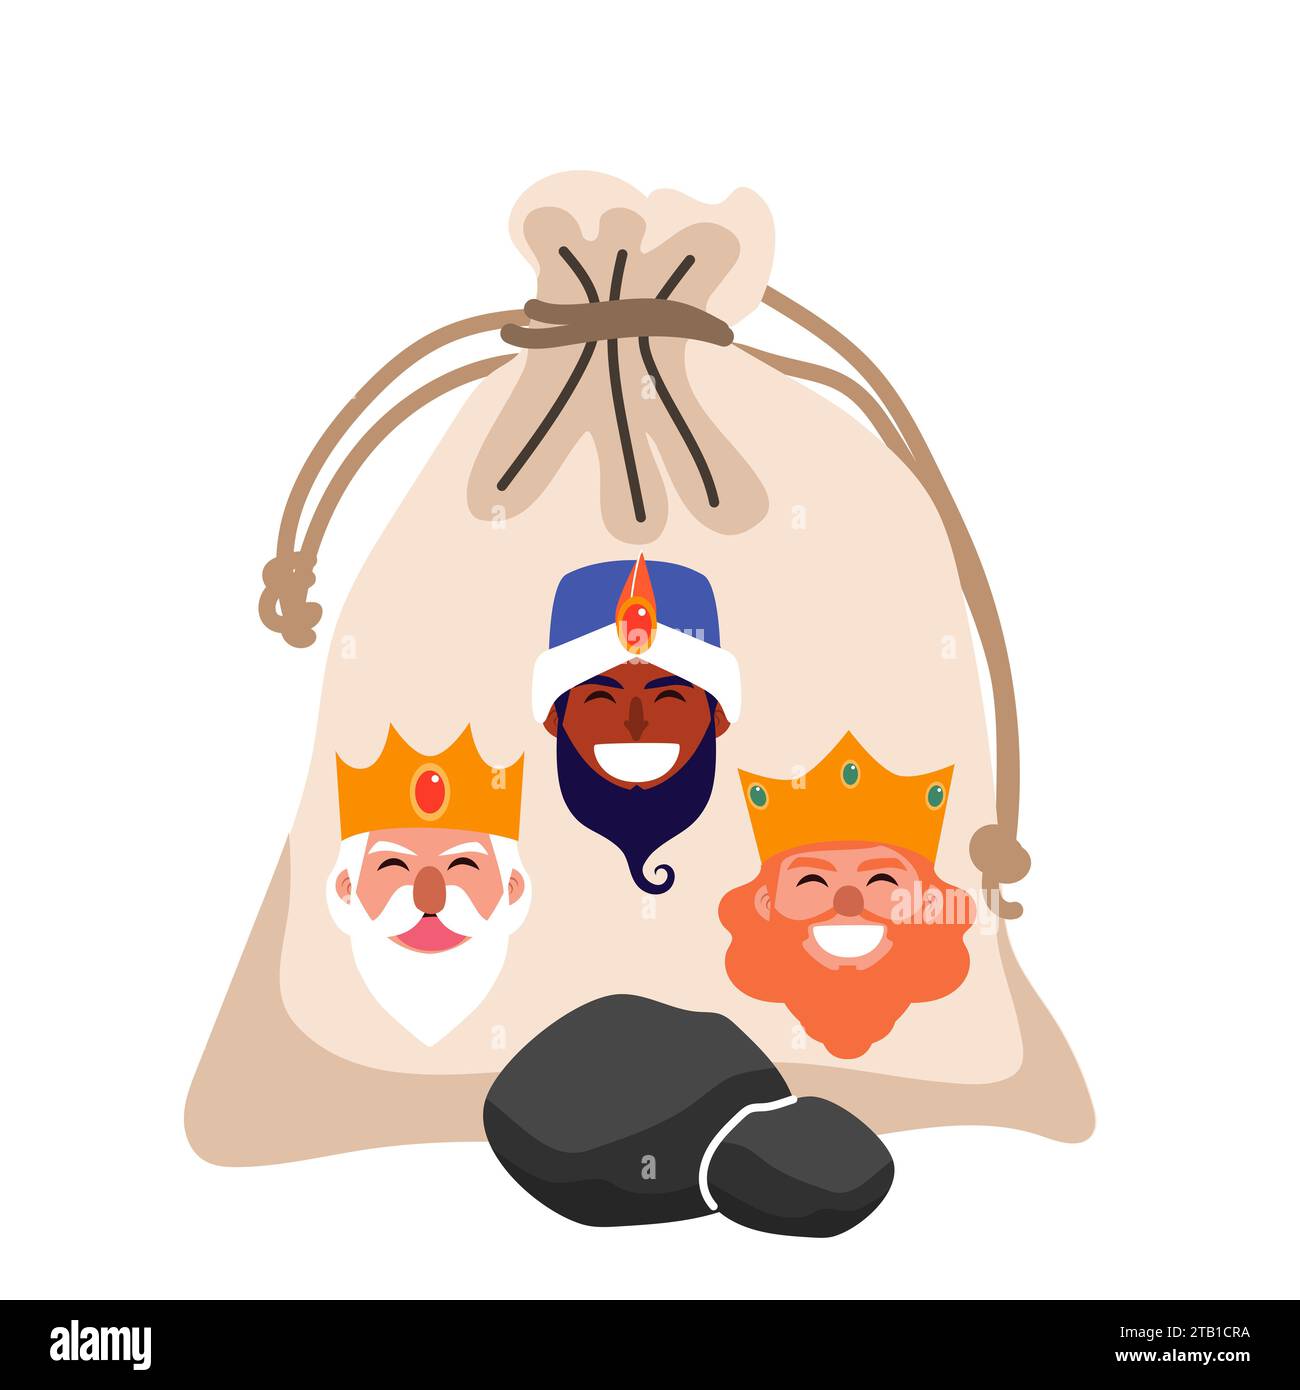 Coal Sack With Three Wise Men Avatar Illustration. Present for naughty kids vector drawing Stock Photo